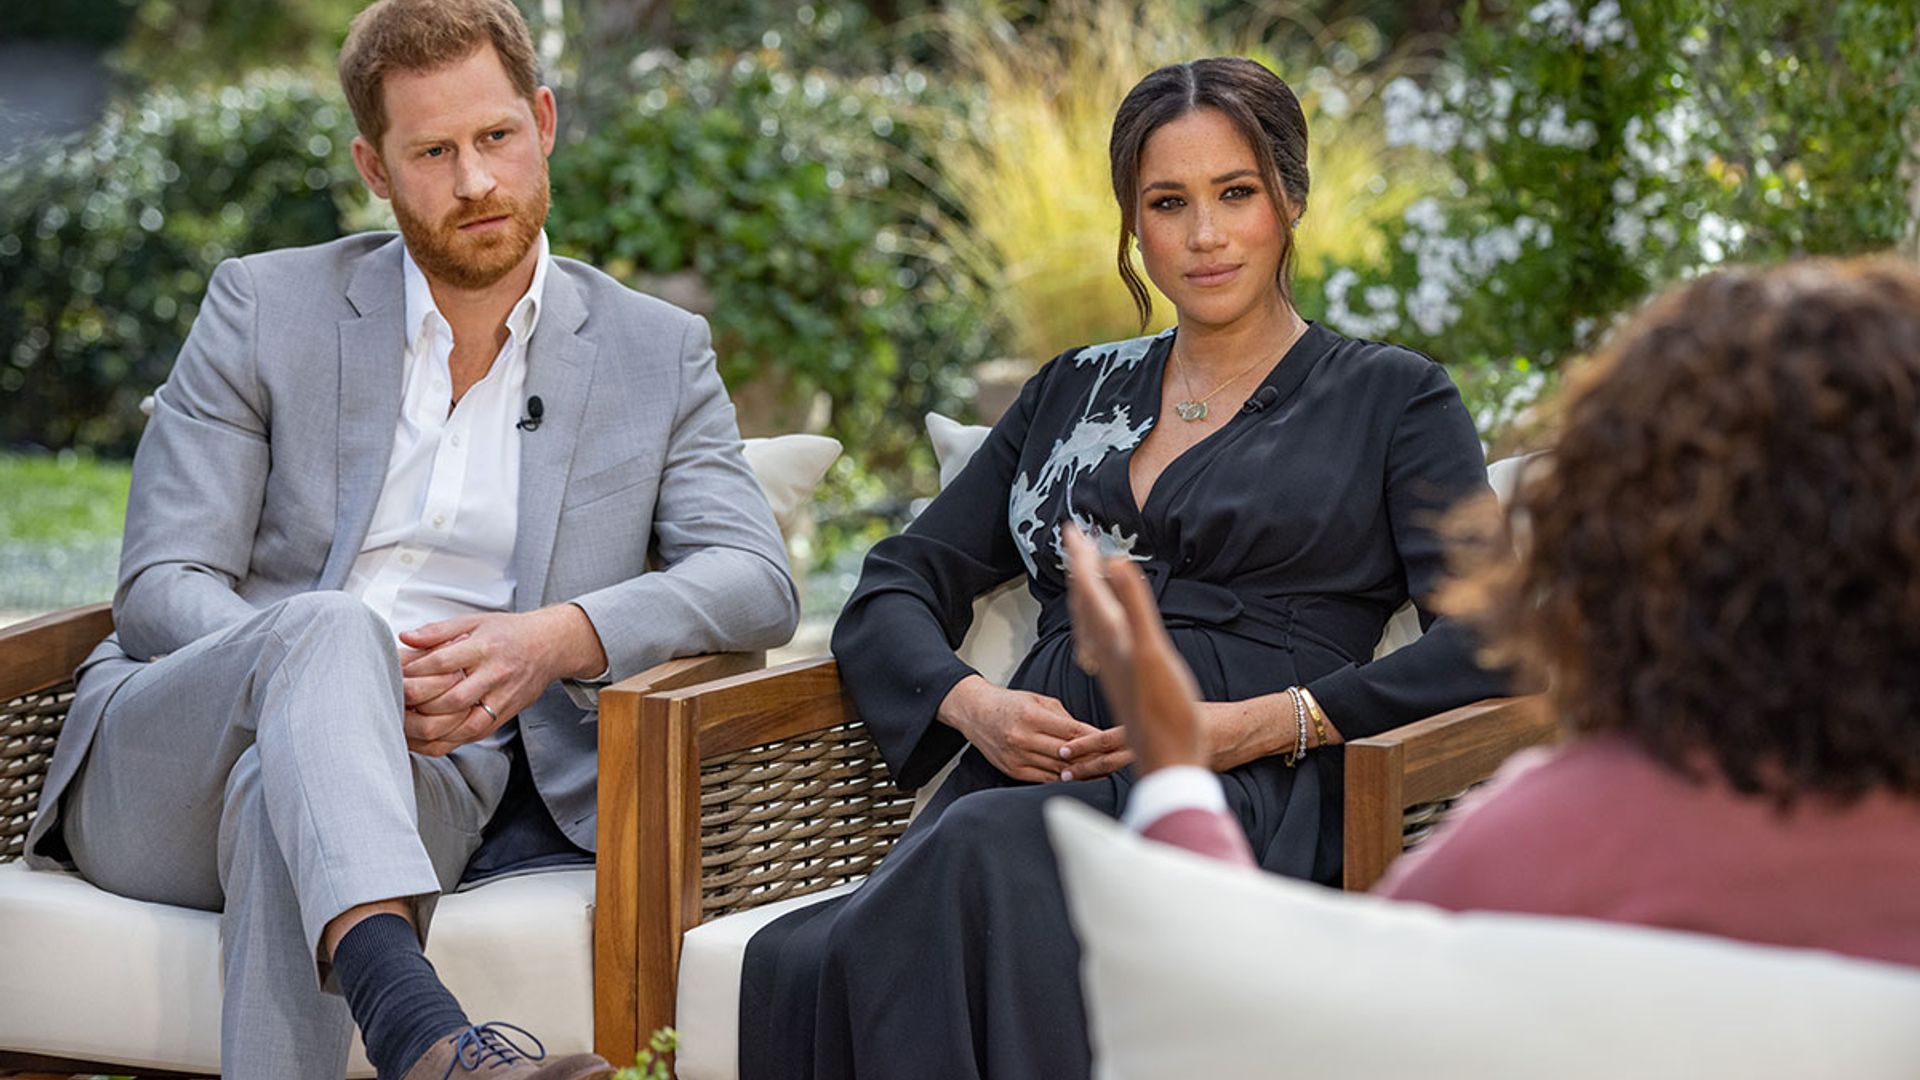 Meghan Markle, Duchess of Sussex: Latest News & Pictures - HELLO!